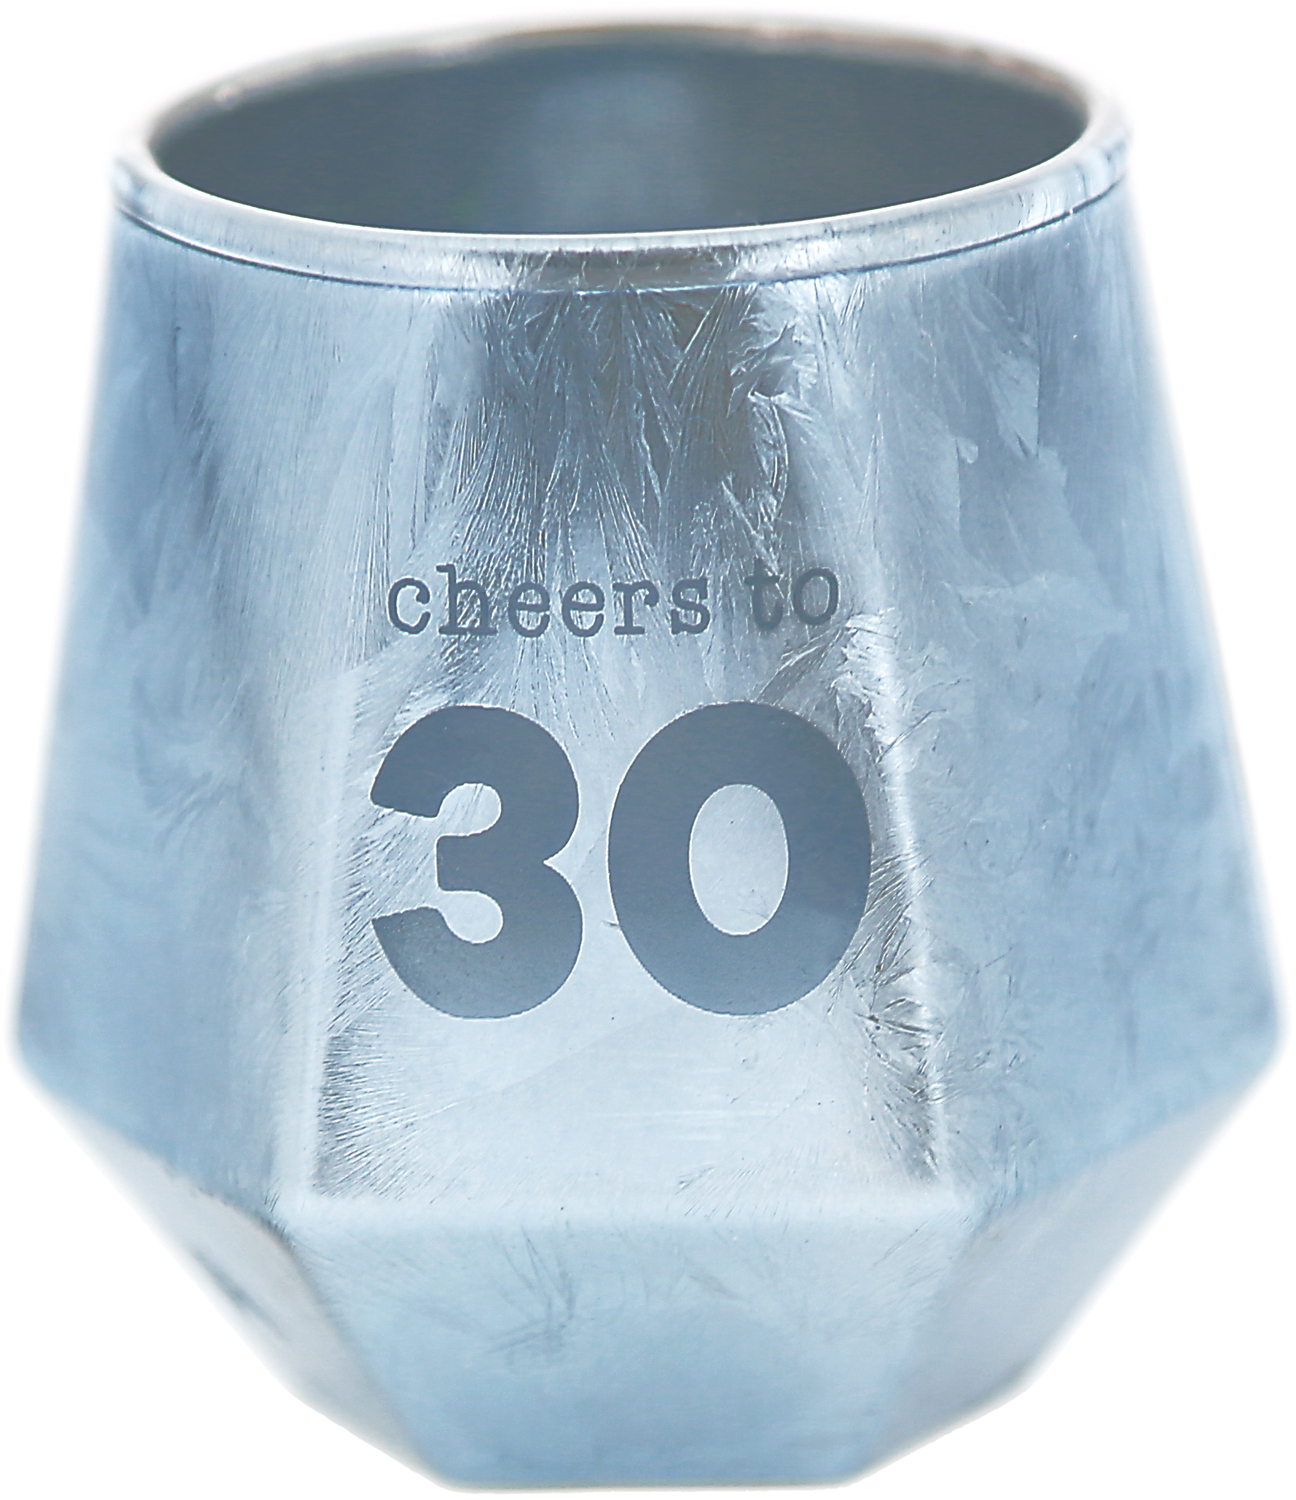 Cheers to 30 by Happy Confetti to You - Cheers to 30 - 3 oz Geometric Shot Glass